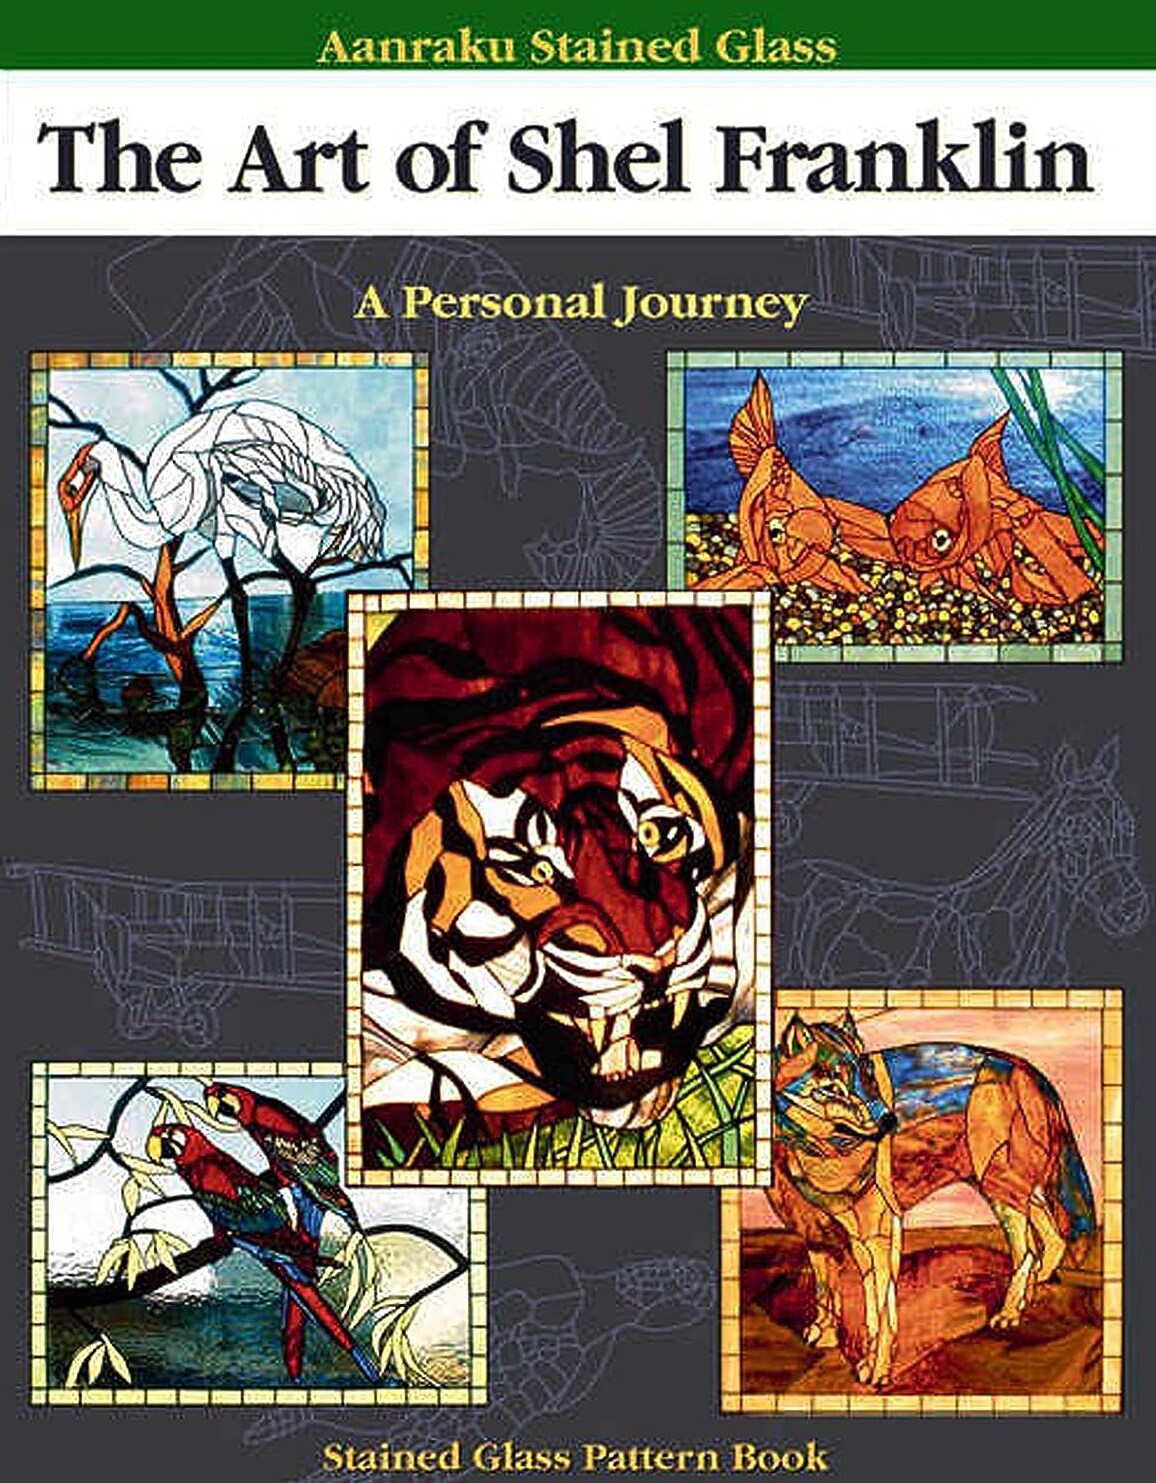 Stained Glass Pattern Book: The Art of Shel Franklin